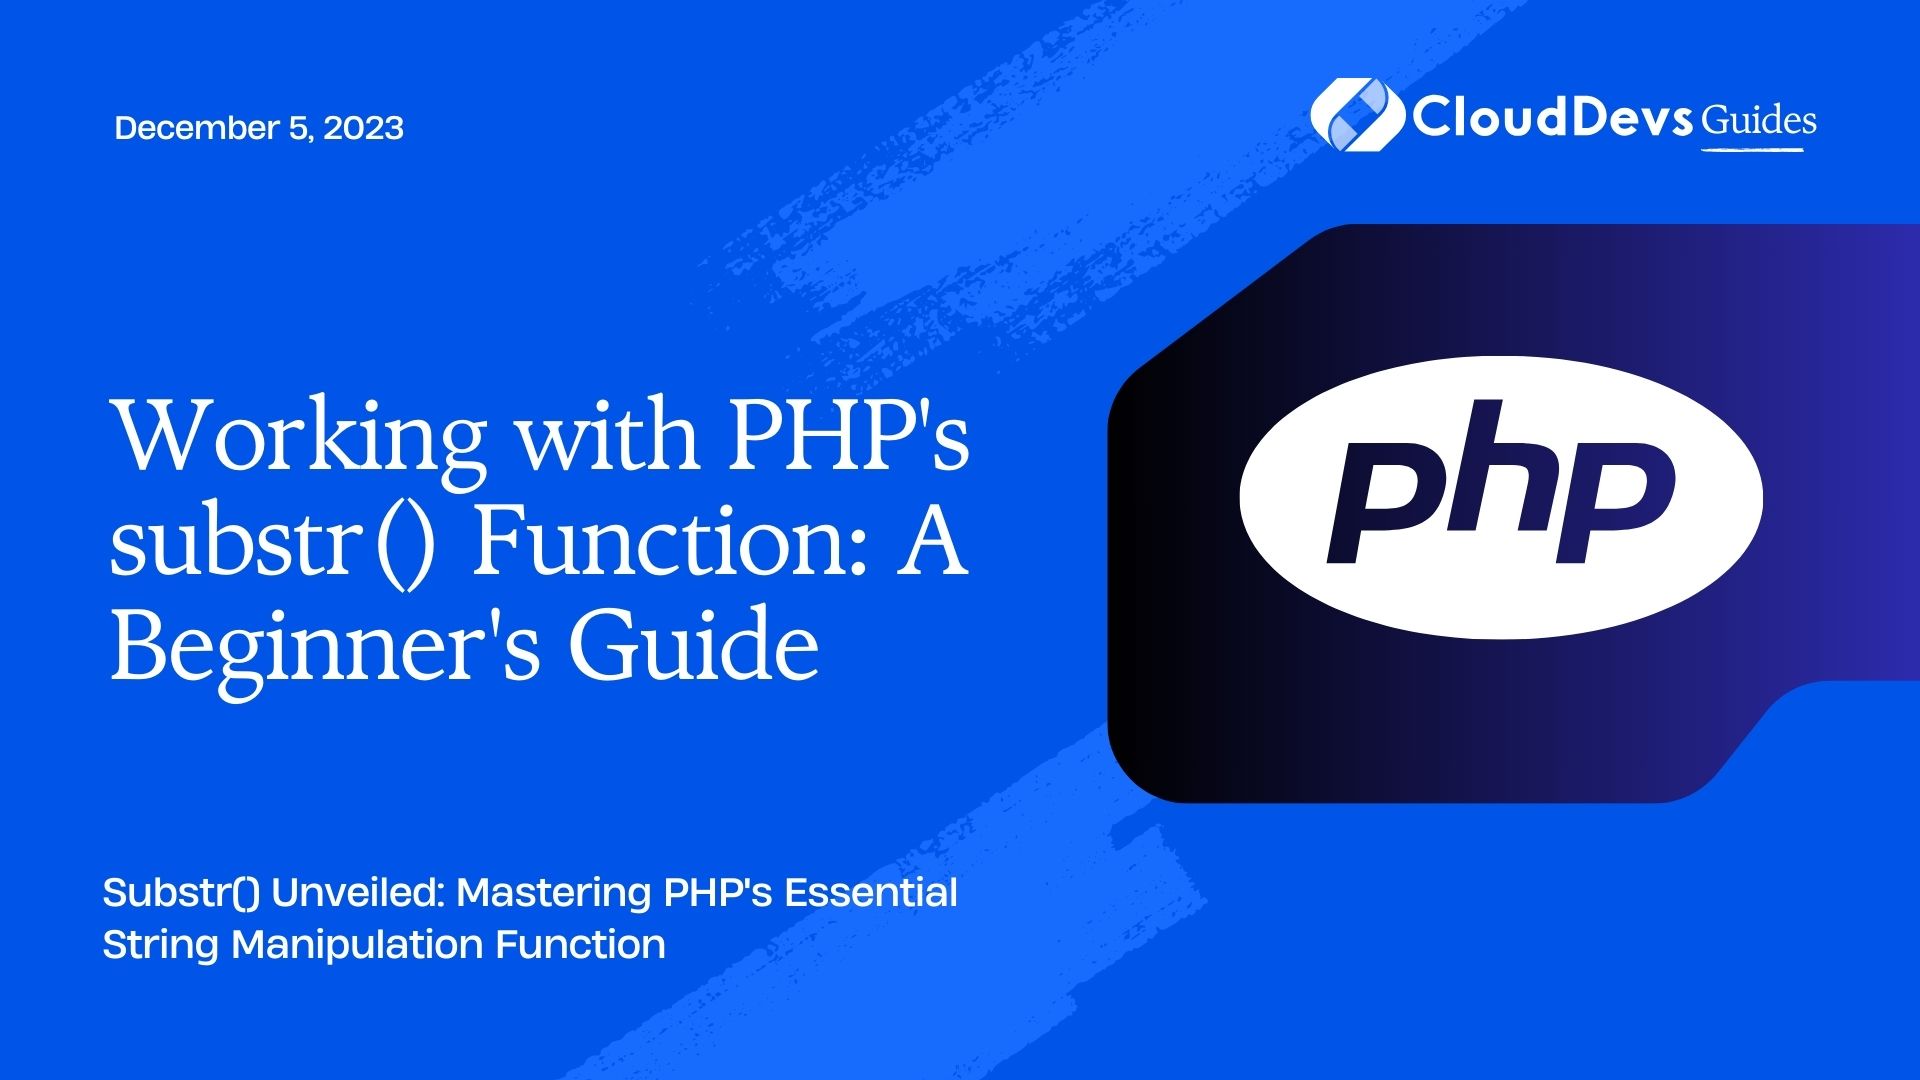 Working with PHP's substr() Function: A Beginner's Guide